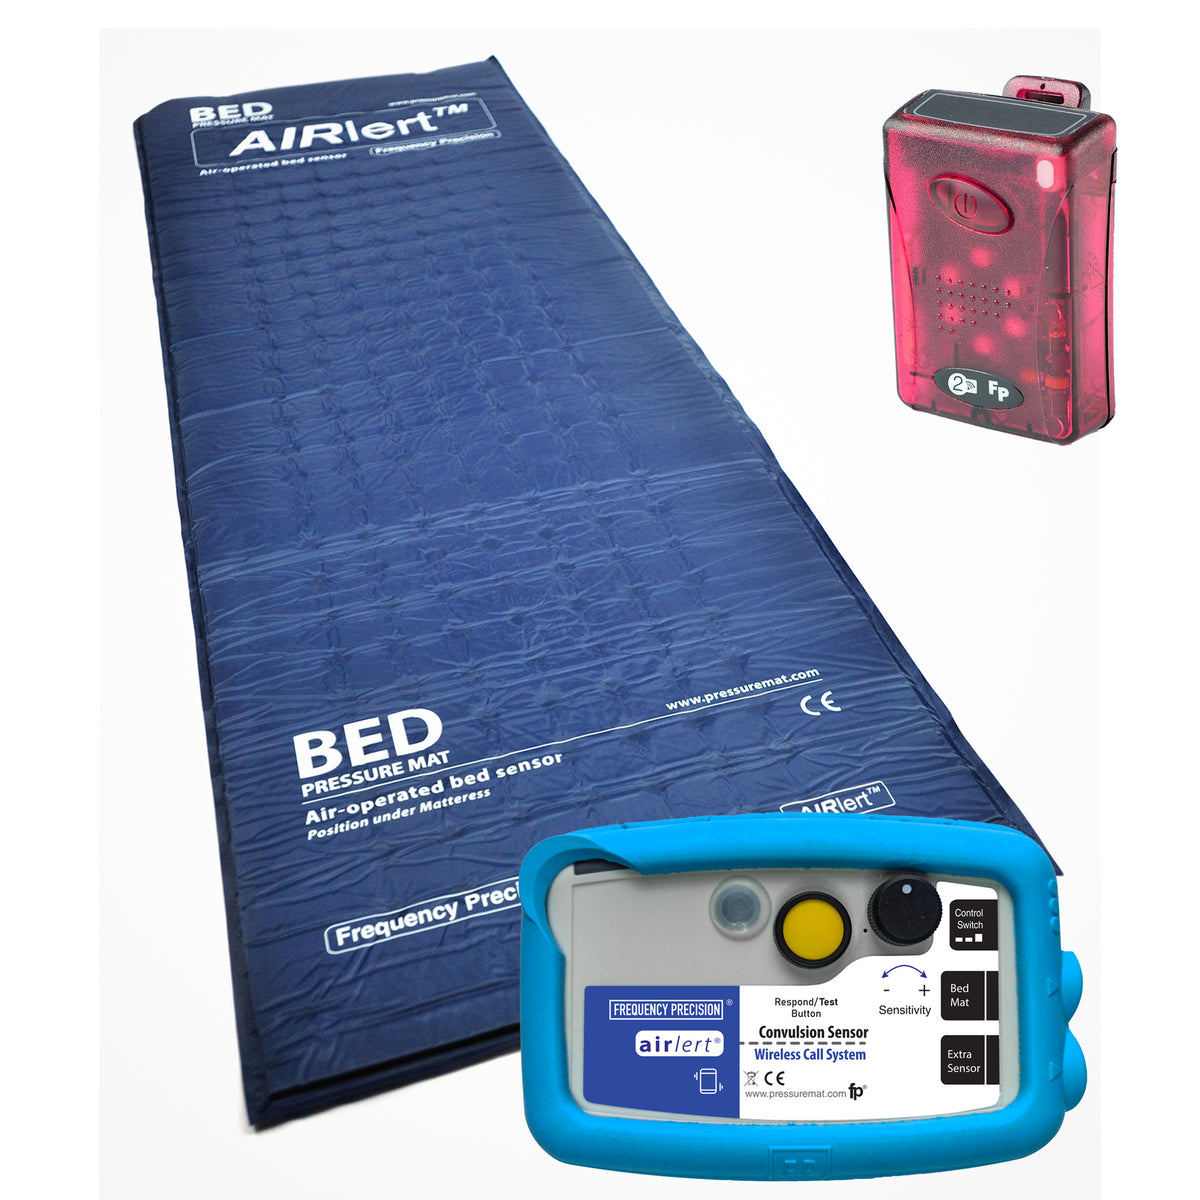 A wireless convulsion sensor mat &amp; pager set with epilepsy alarm						